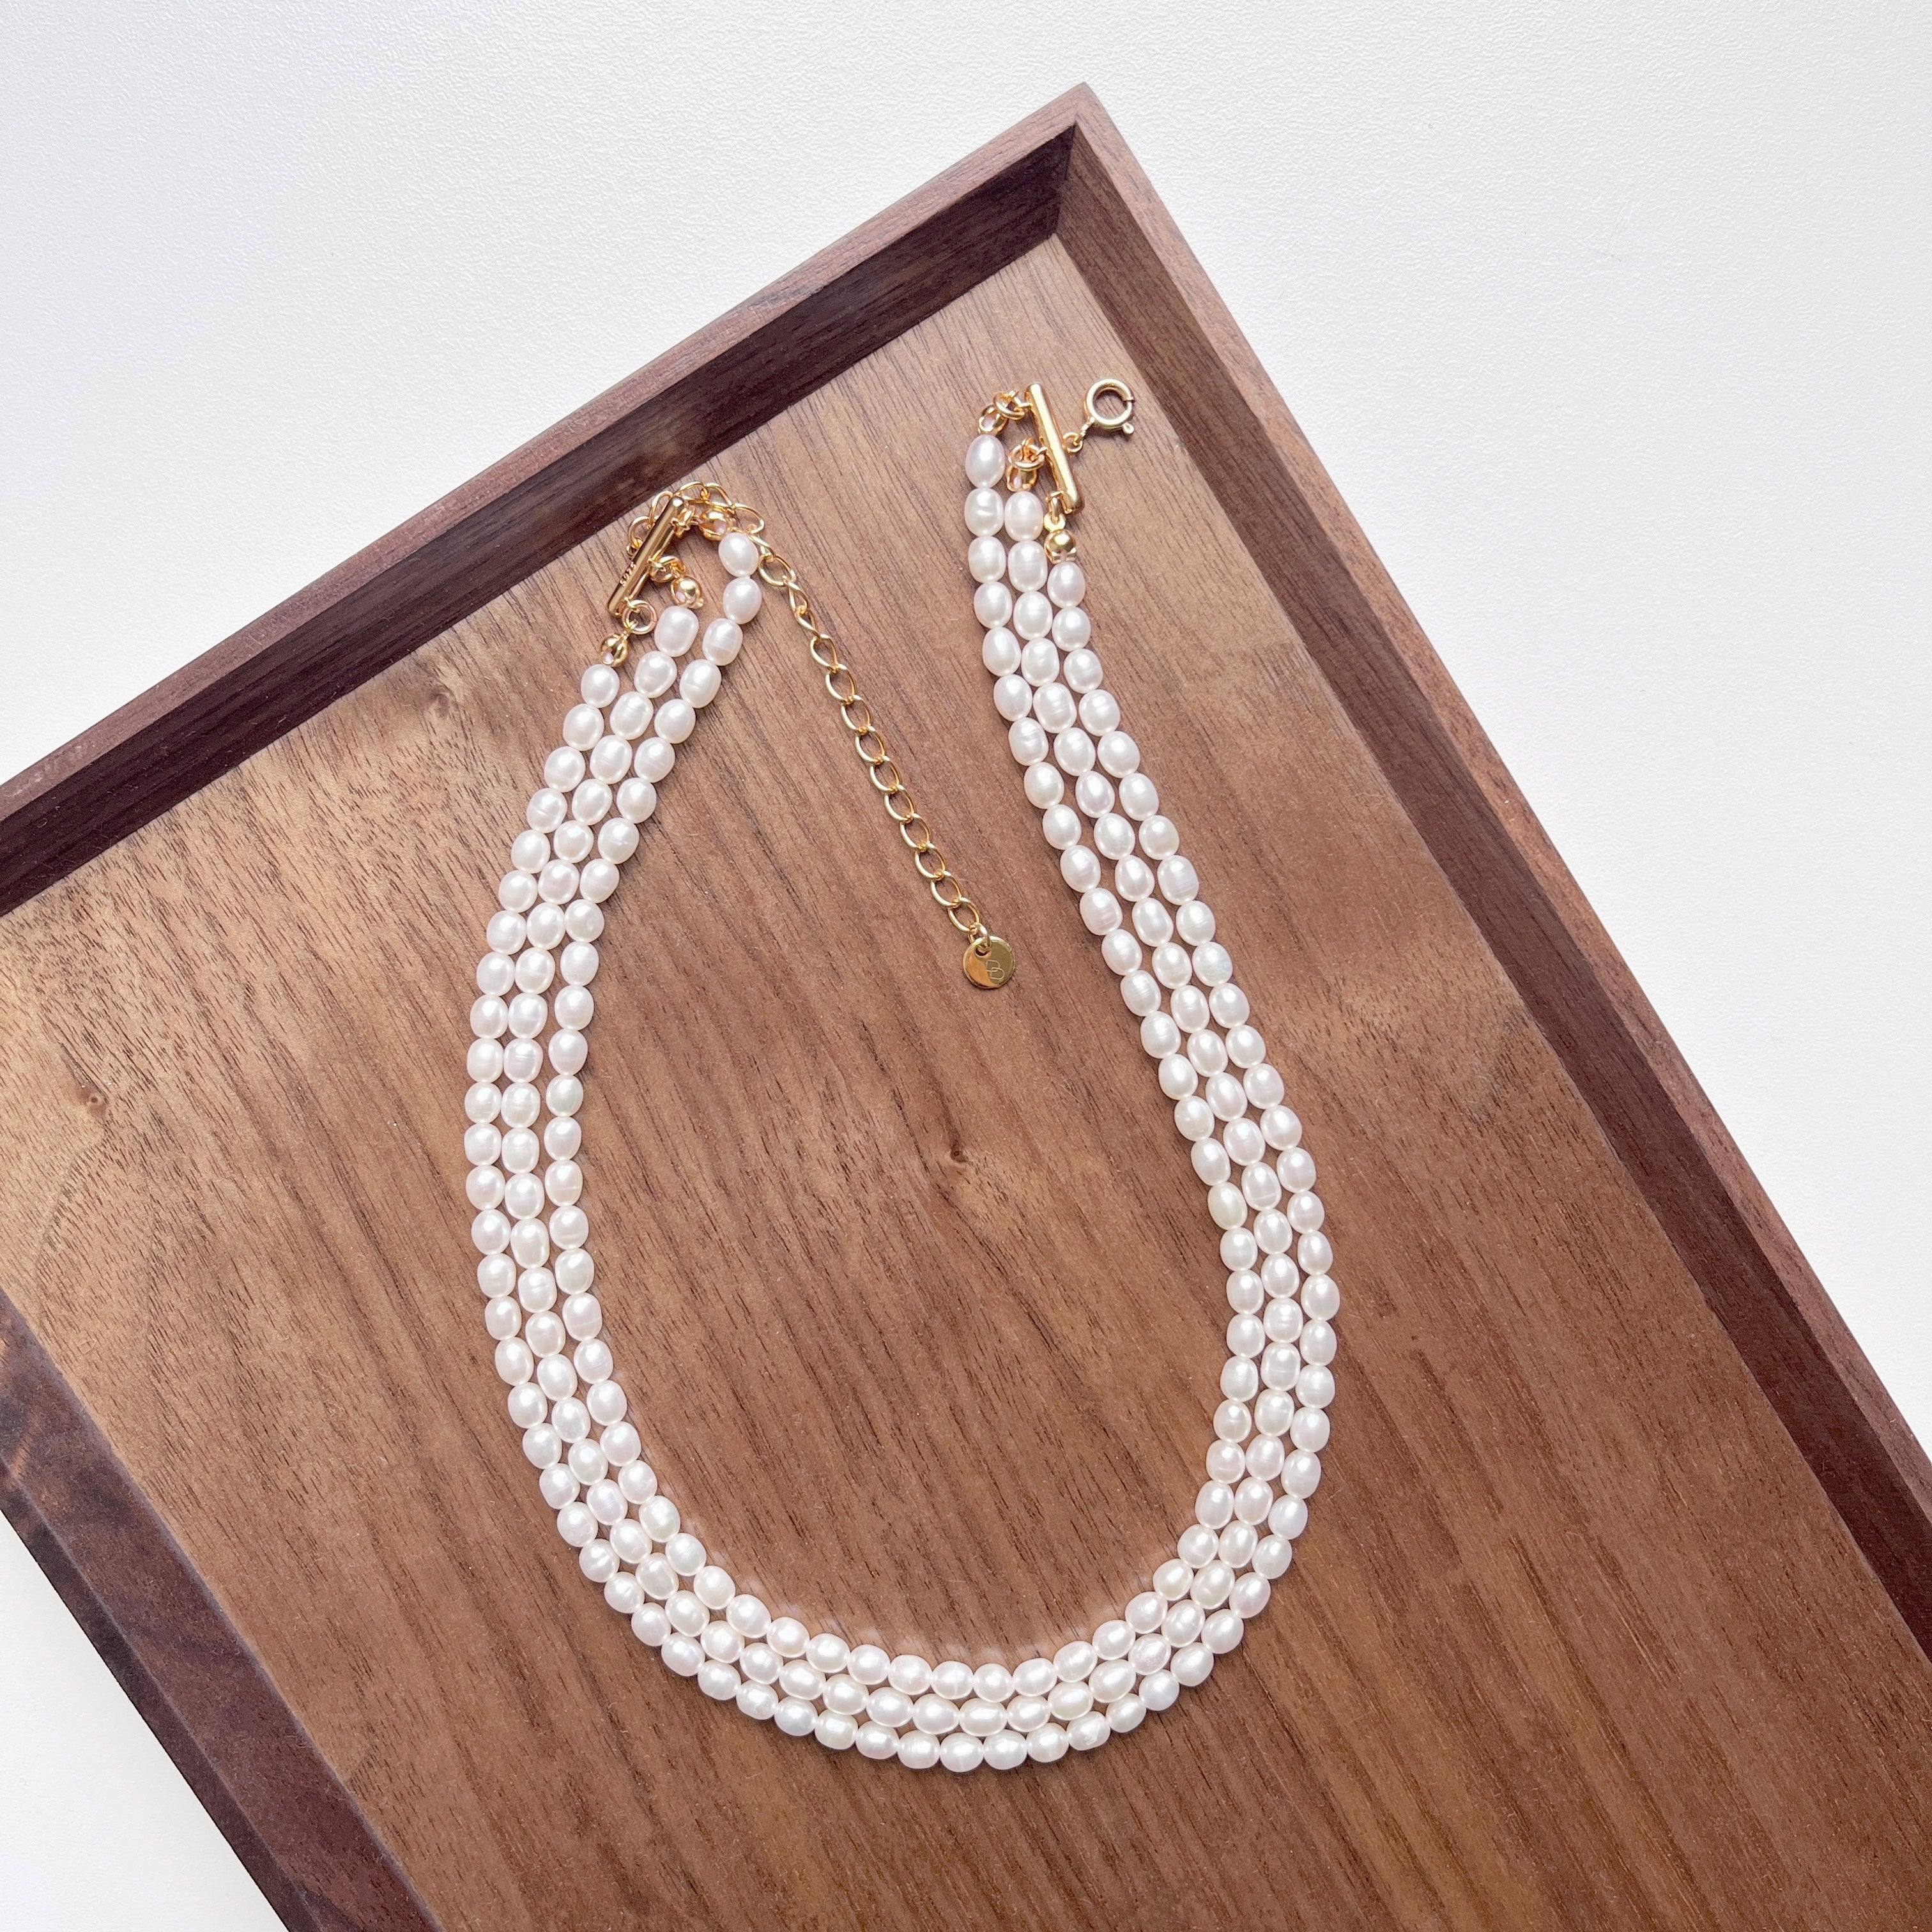 Triple strand pearl necklace Necklace made of white pea… | Drouot.com